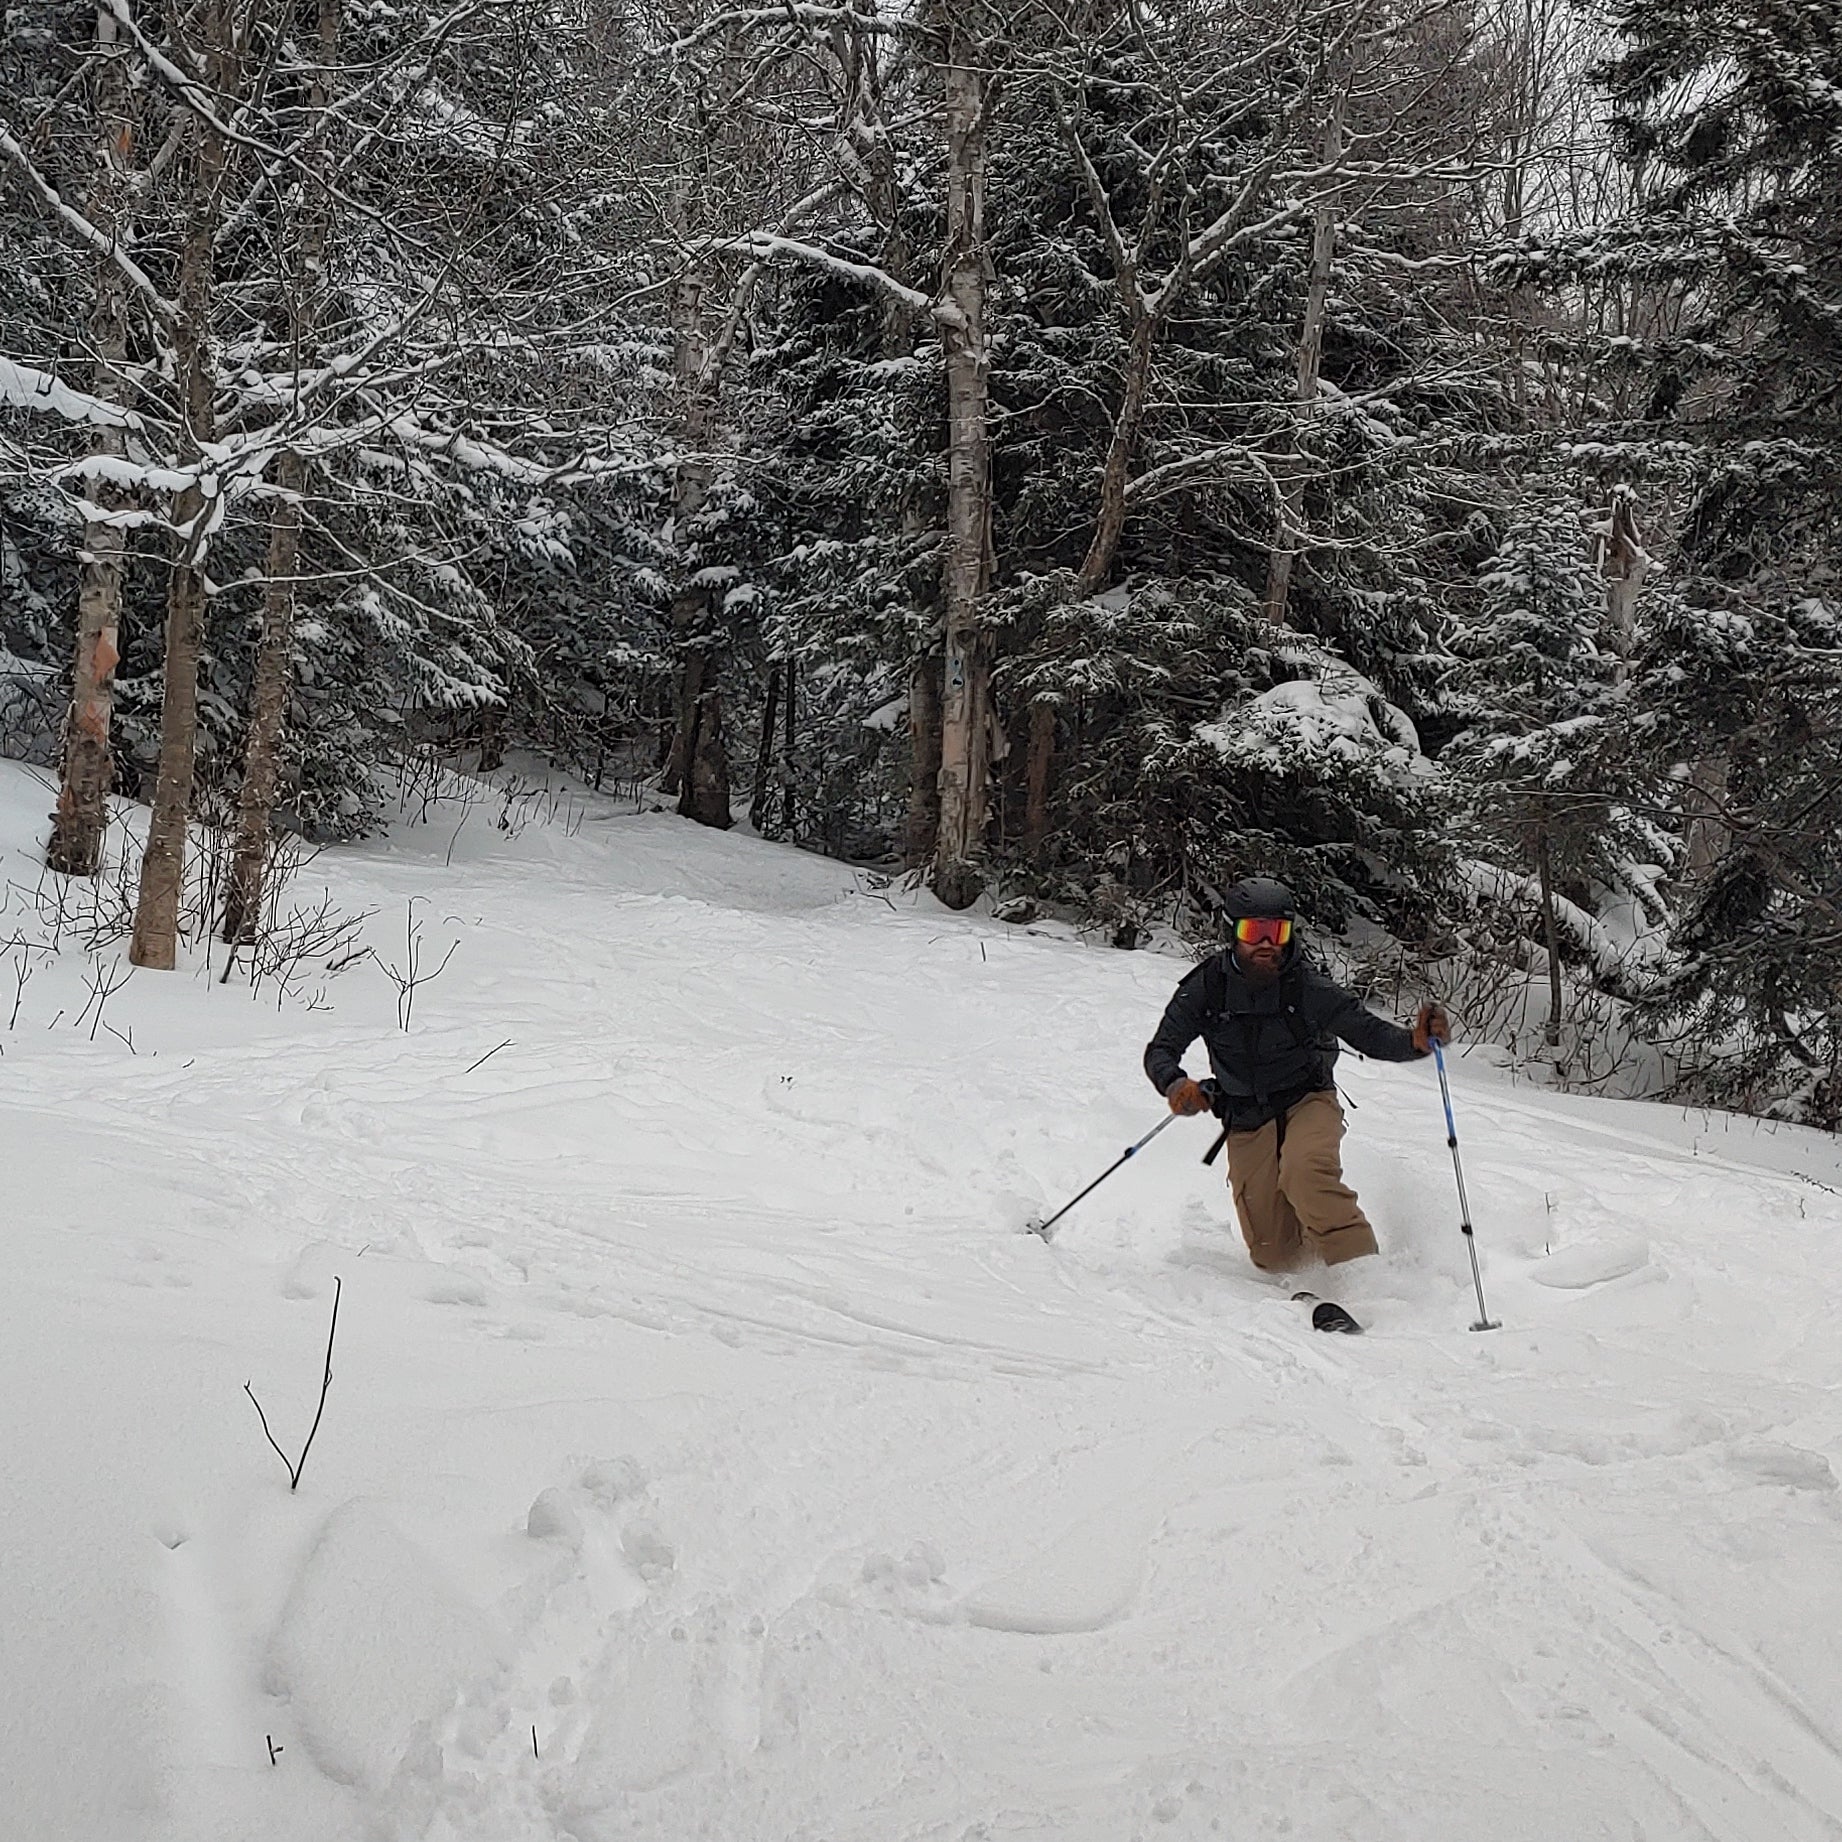 A telemark skier taking tele turns in a clearing in the woods